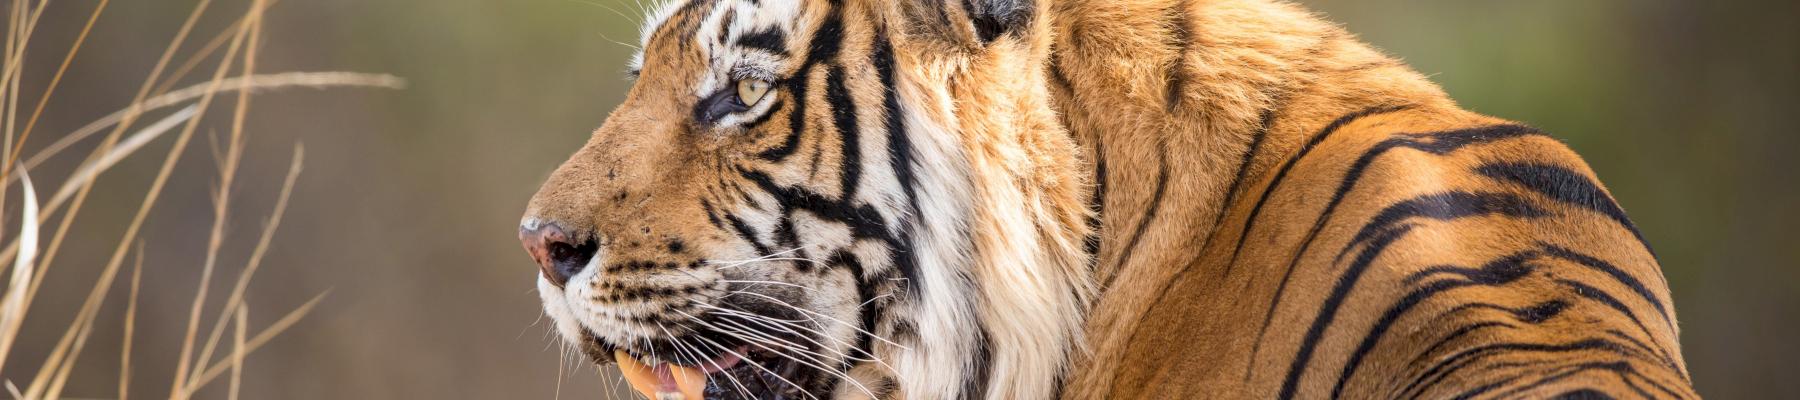 Shared vision for the future of an iconic cat in the Year of the Tiger -  Wildlife Trade News from TRAFFIC